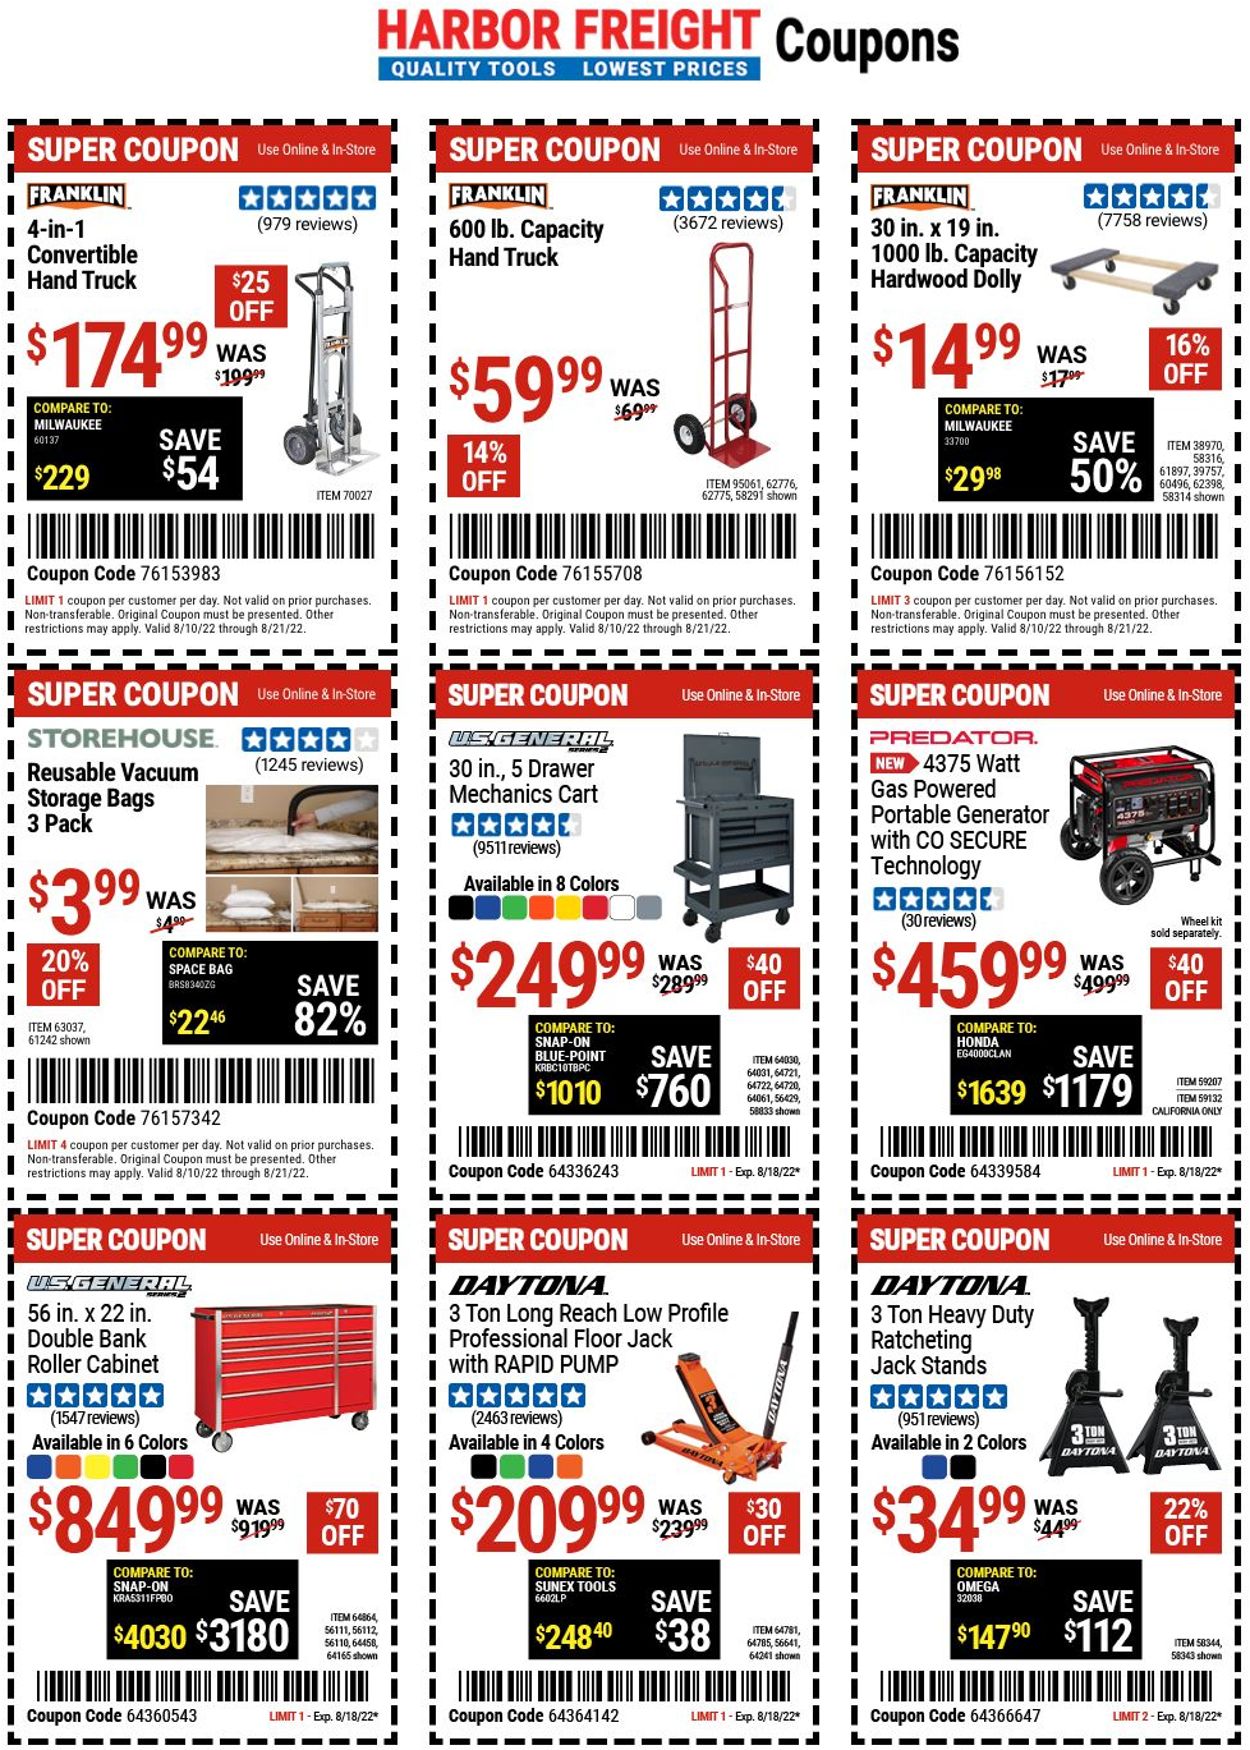 Harbor Freight Current weekly ad 08/11 08/18/2022